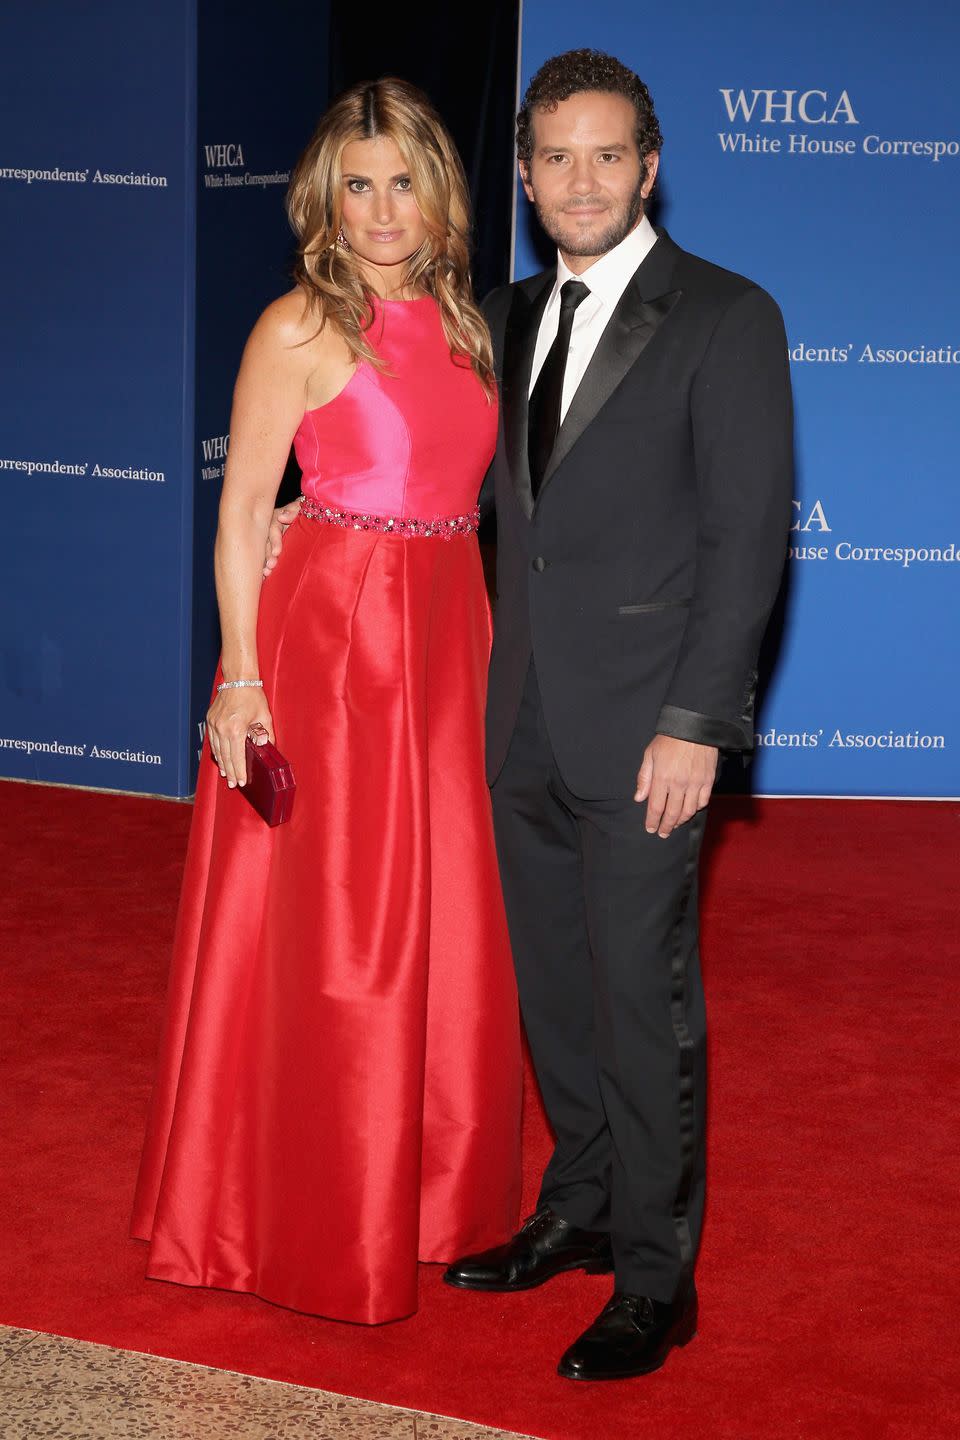 washington, dc   april 25  actress and singer idina menzel and aaron lohr attend the 101st annual white house correspondents association dinner at the  washington hilton on april 25, 2015 in washington, dc  photo by paul morigiwireimage